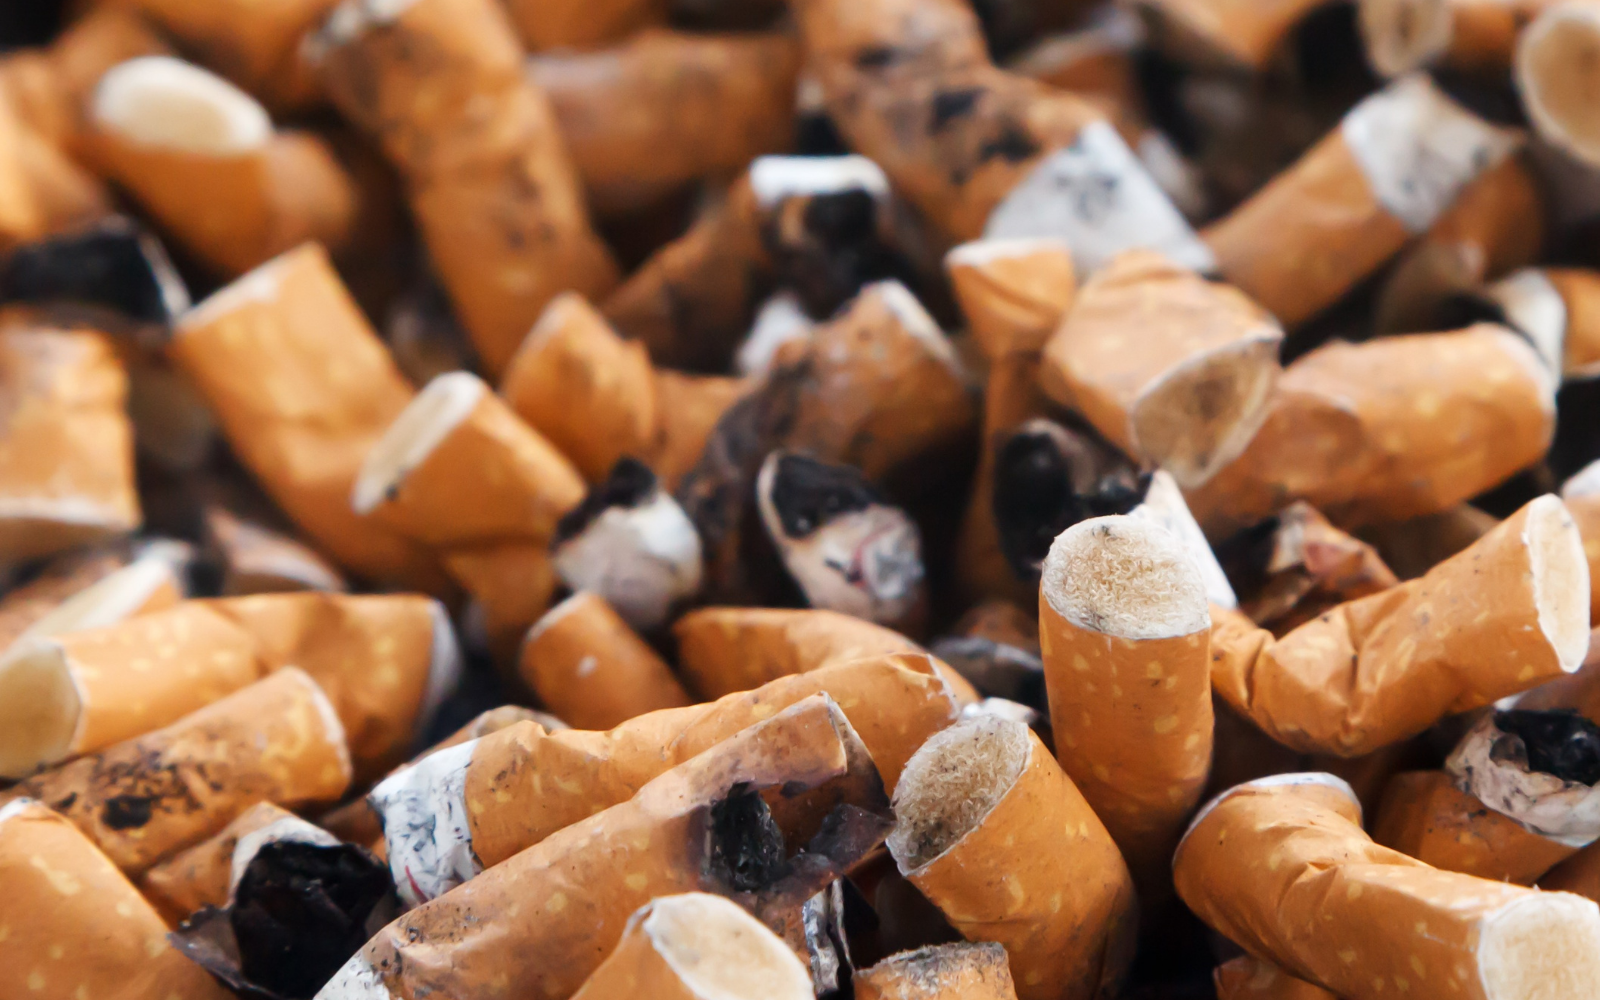 New Zealand is banning cigarette sales...